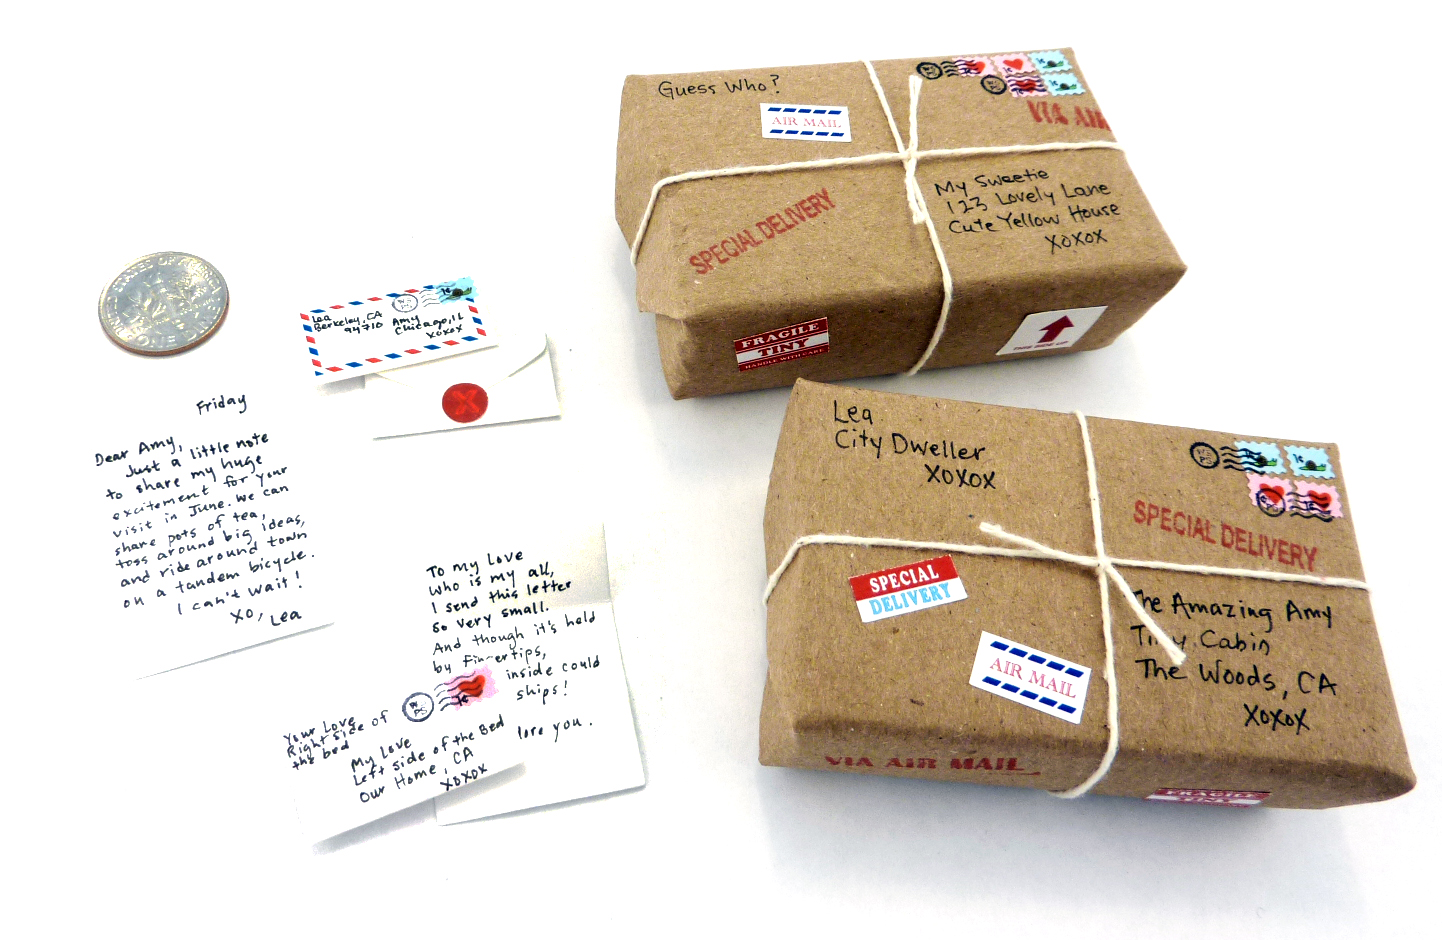 Tiny letters and packages made with the World's Smallest Post Service: DIY Activity Kit.